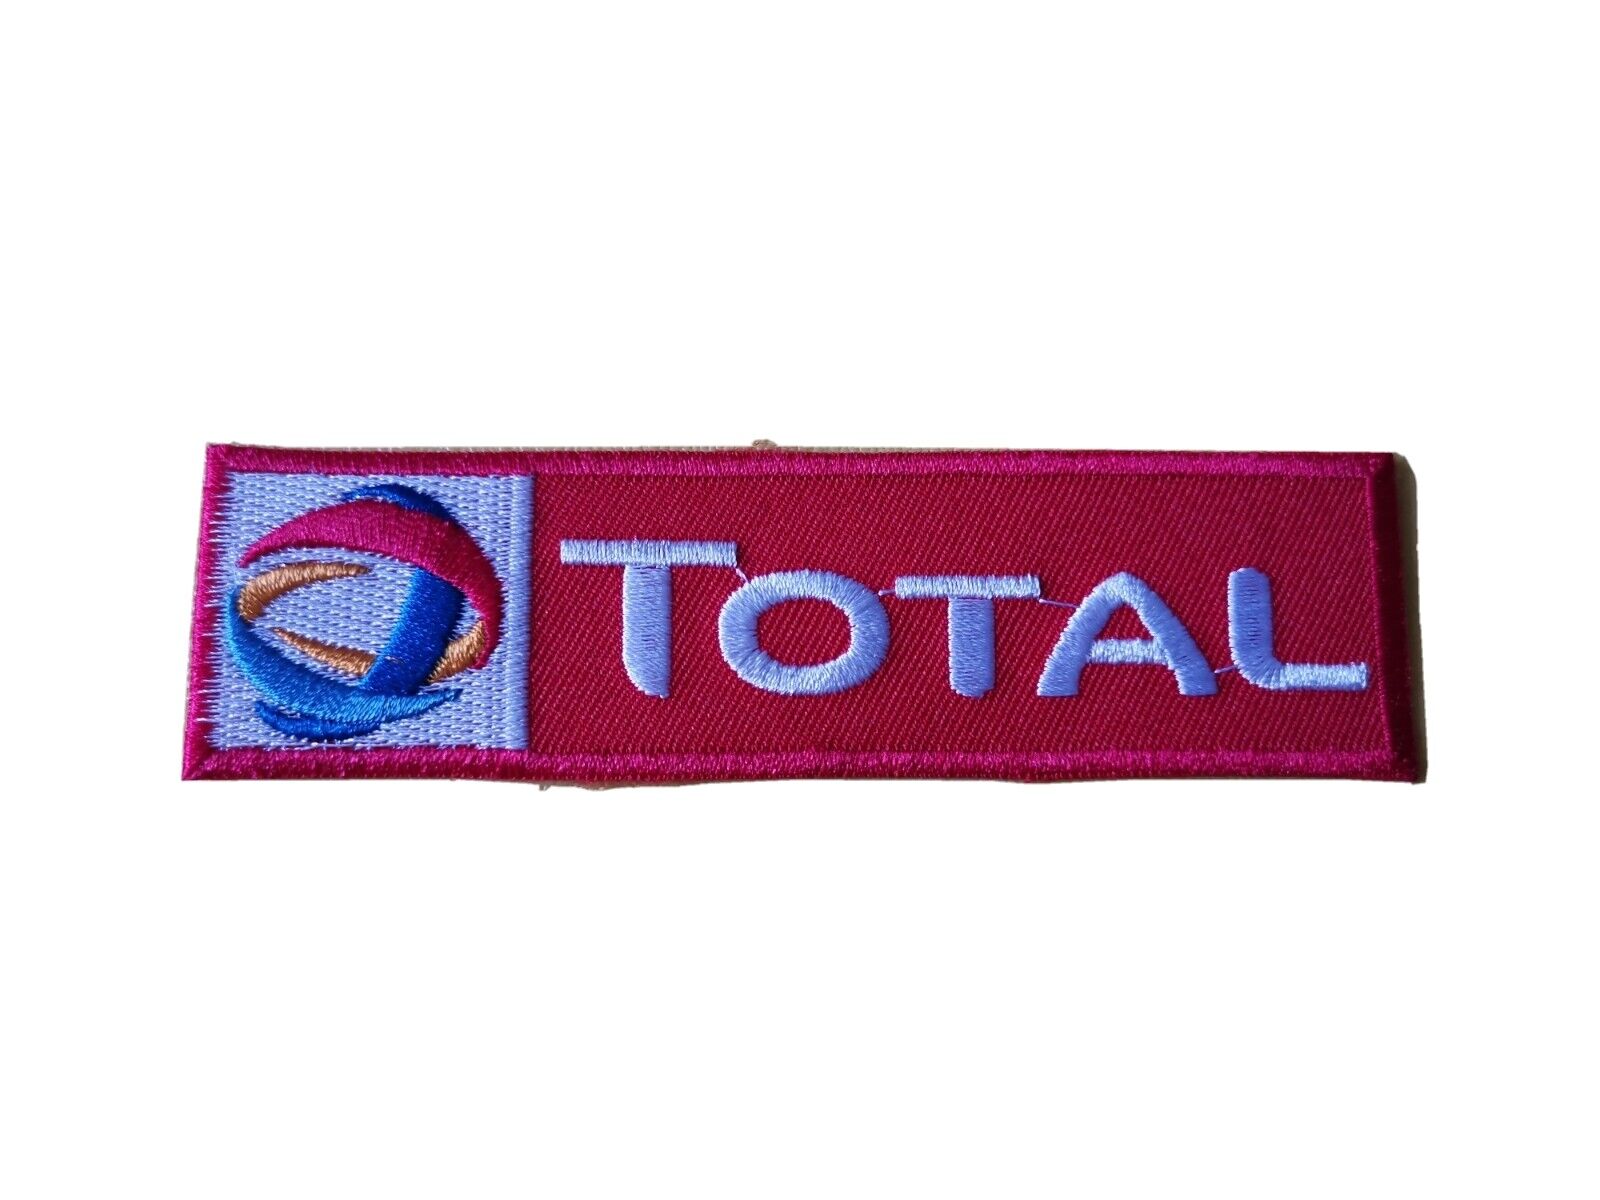 TOTAL (a) Stripe Motor Racing / Motorsport Patch Sew / Iron On Badge